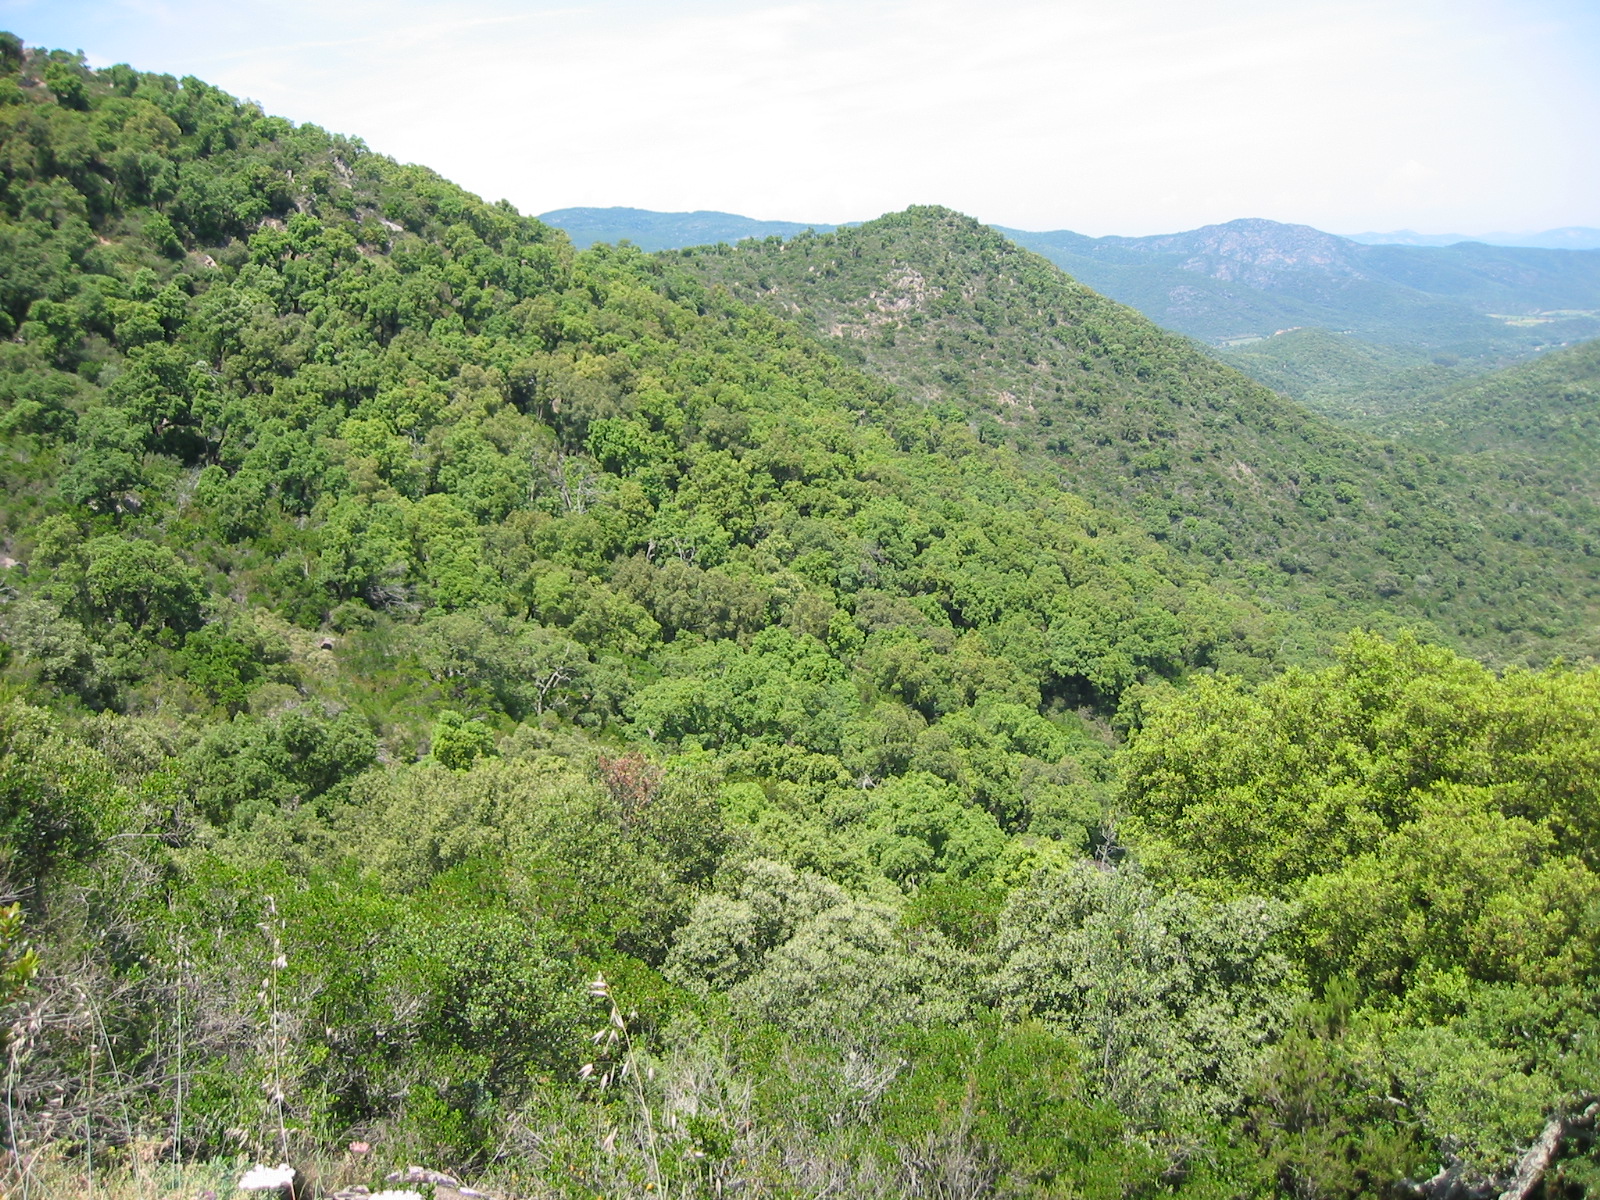 http://upload.wikimedia.org/wikipedia/commons/7/7d/Massif-des-Maures-3.JPG?uselang=fr